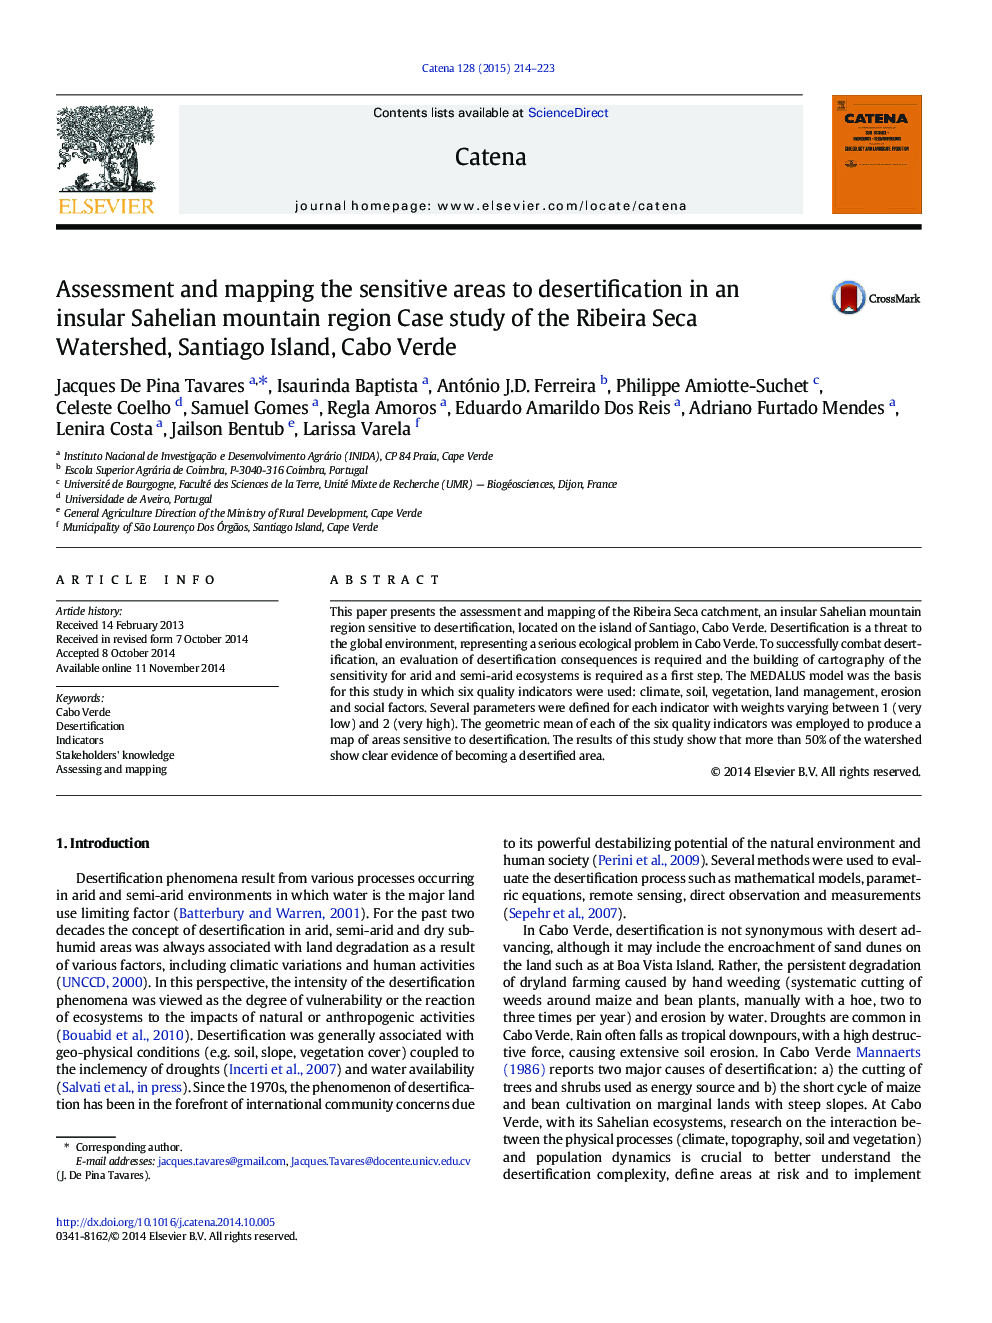 Assessment and mapping the sensitive areas to desertification in an insular Sahelian mountain region Case study of the Ribeira Seca Watershed, Santiago Island, Cabo Verde